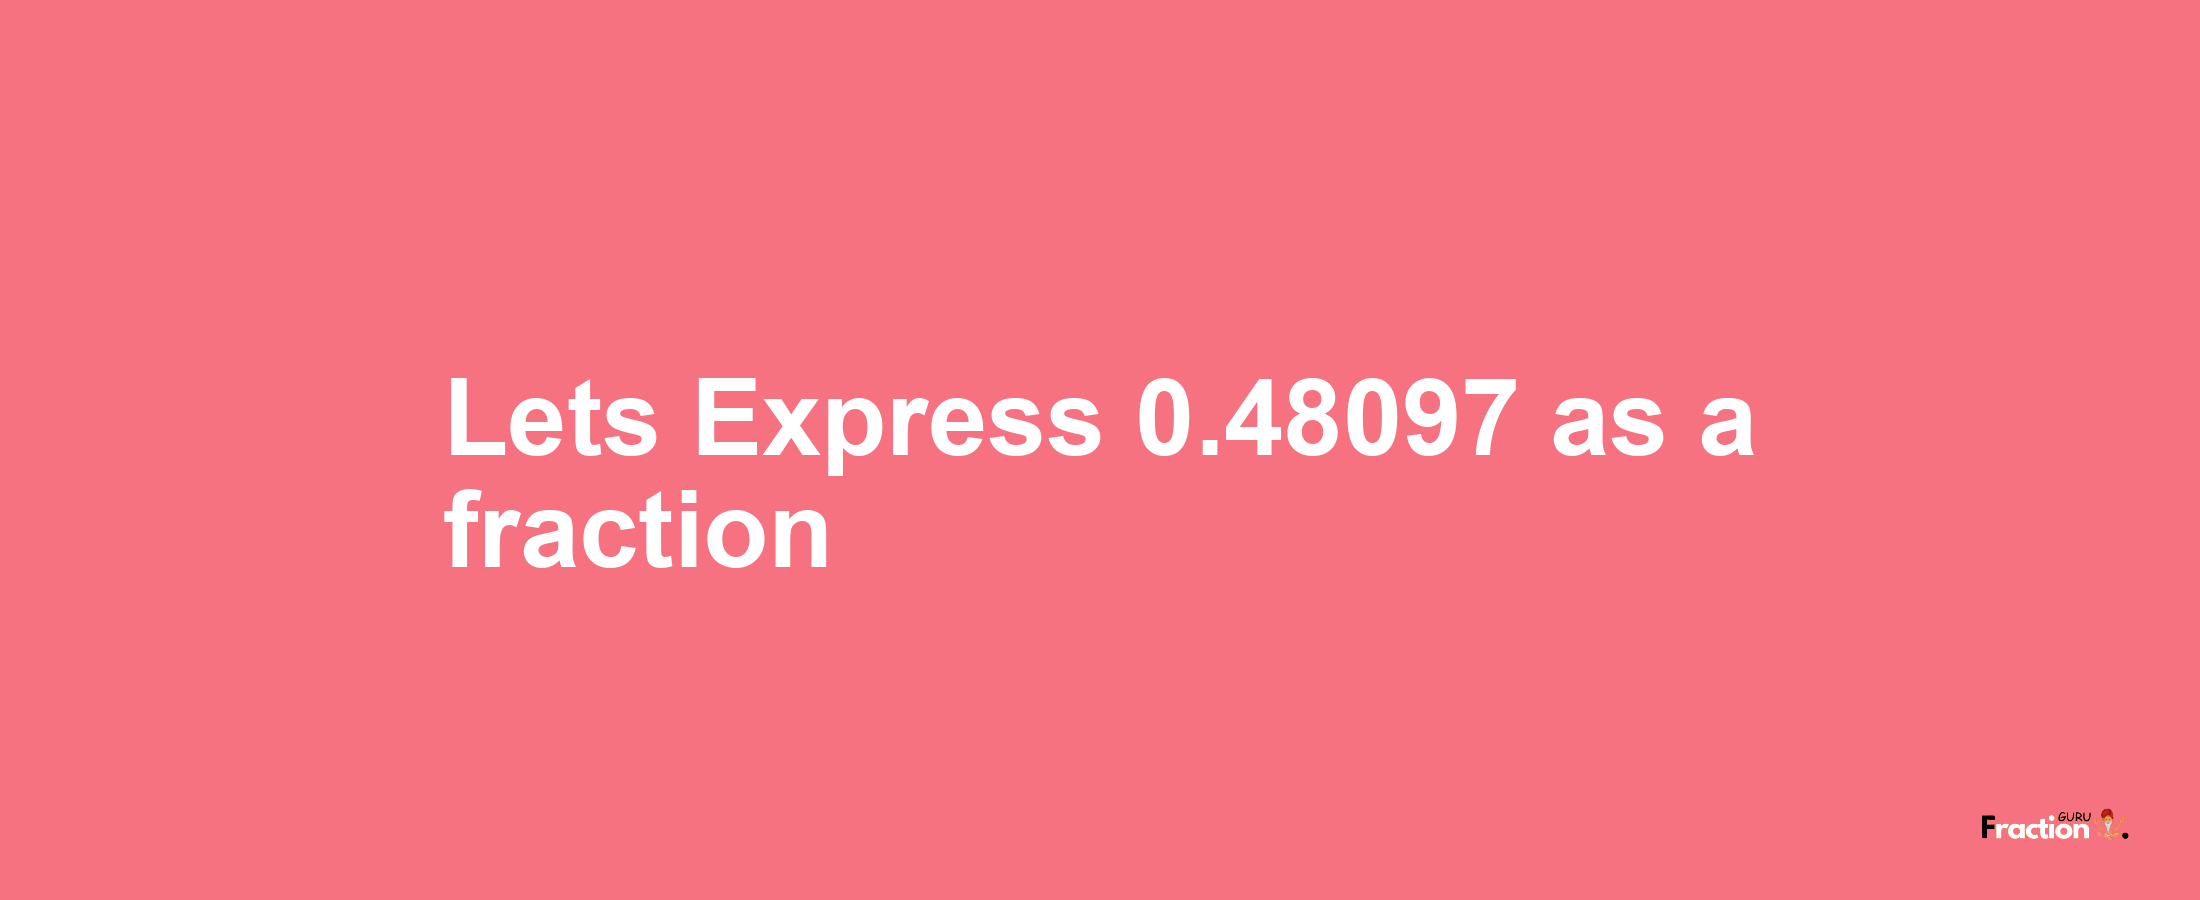 Lets Express 0.48097 as afraction